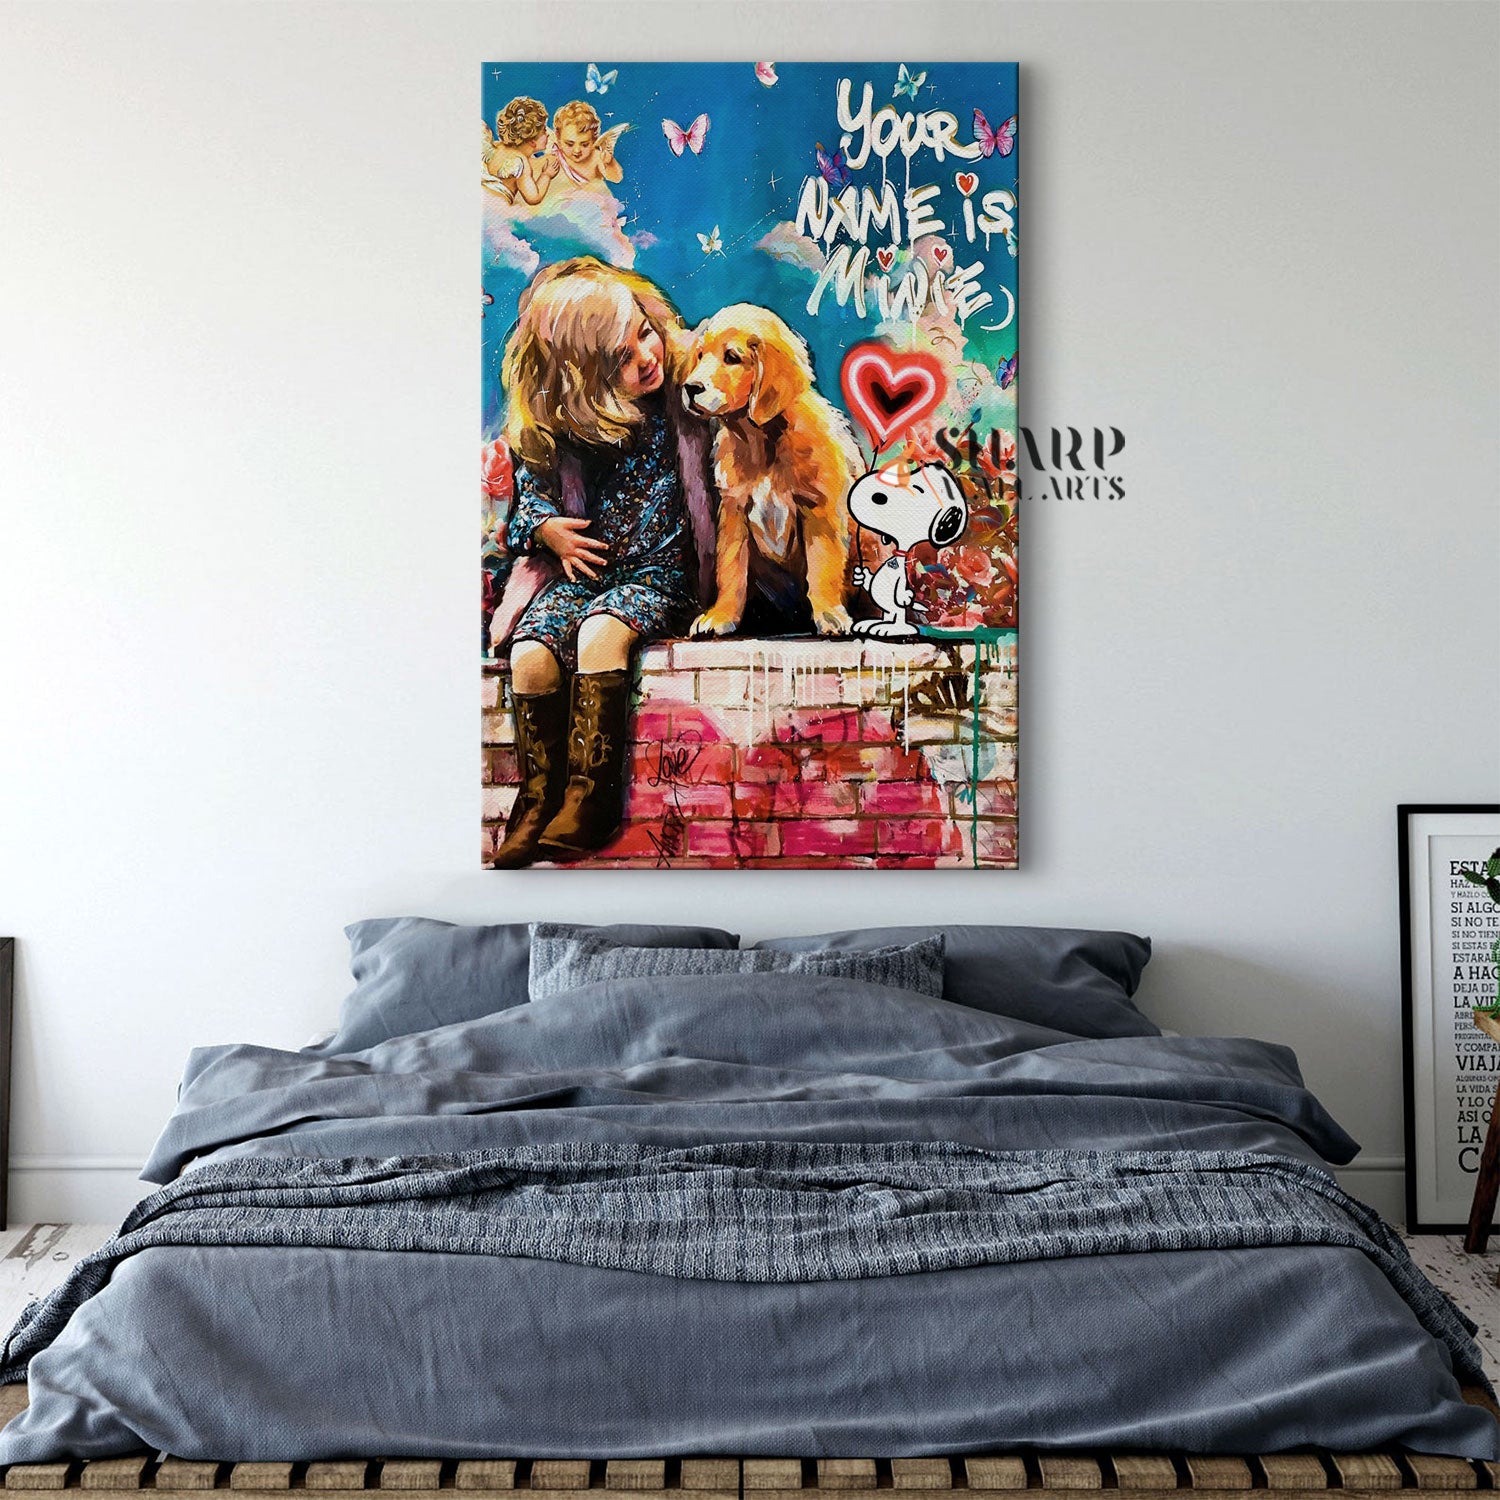 Your Name Is Minie Canvas Wall Art